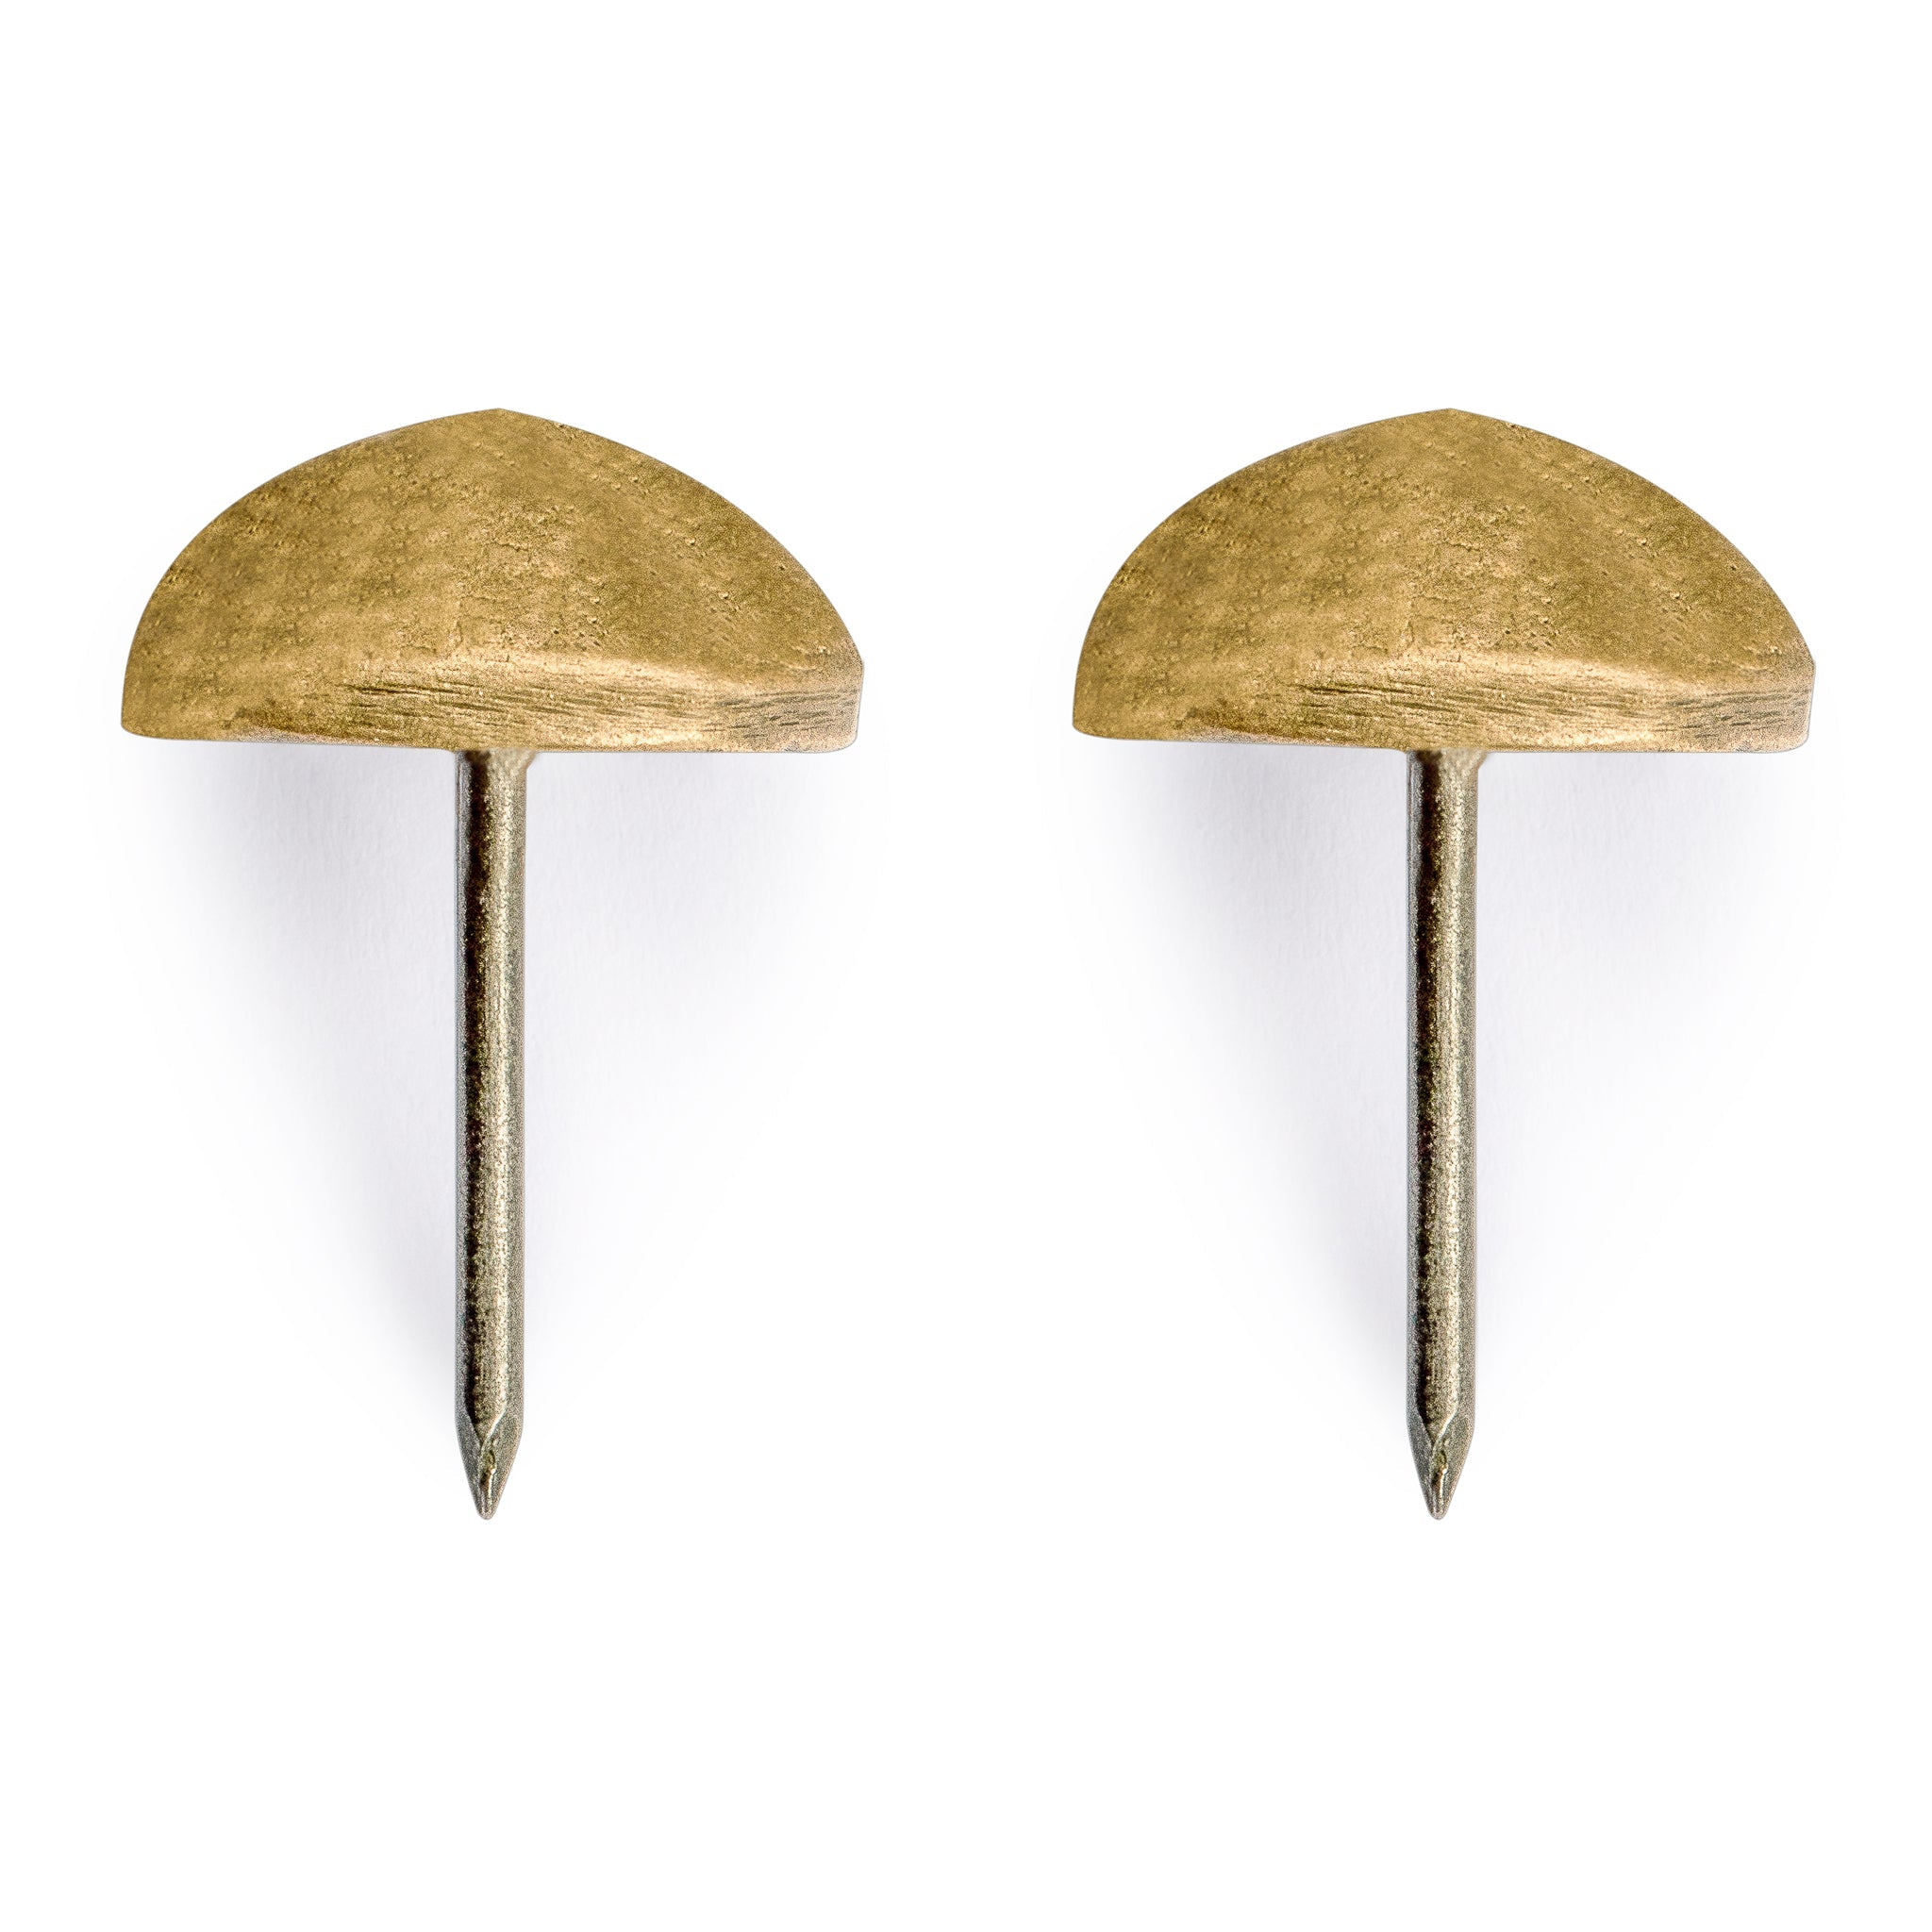 Brass Studs with 0.8" Heads - Set of 2-Chinese Brass Hardware